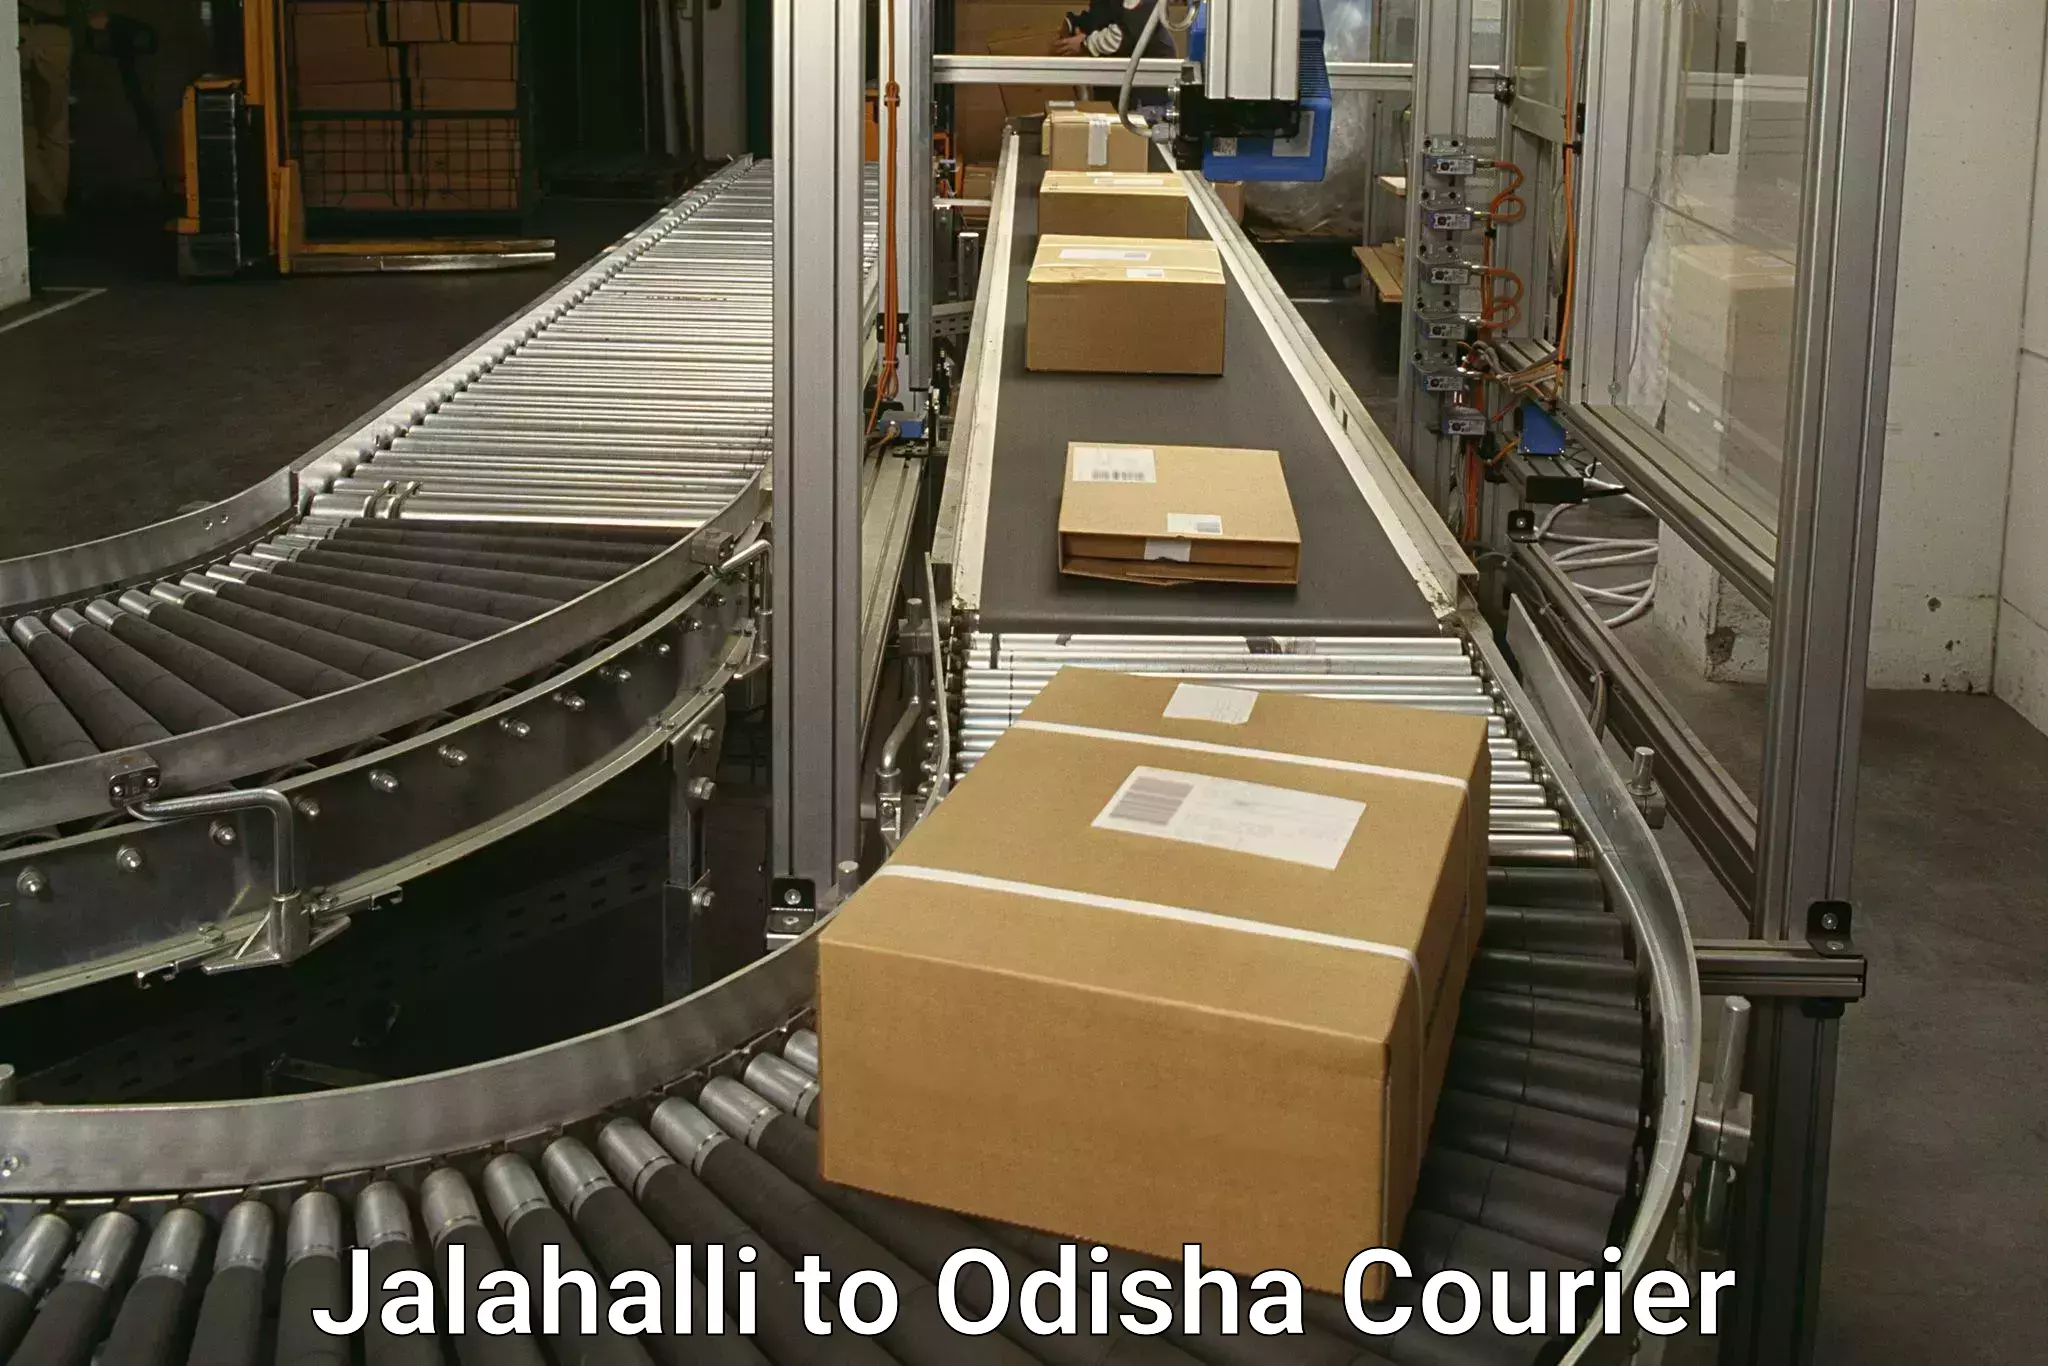 Global shipping networks Jalahalli to Bheden